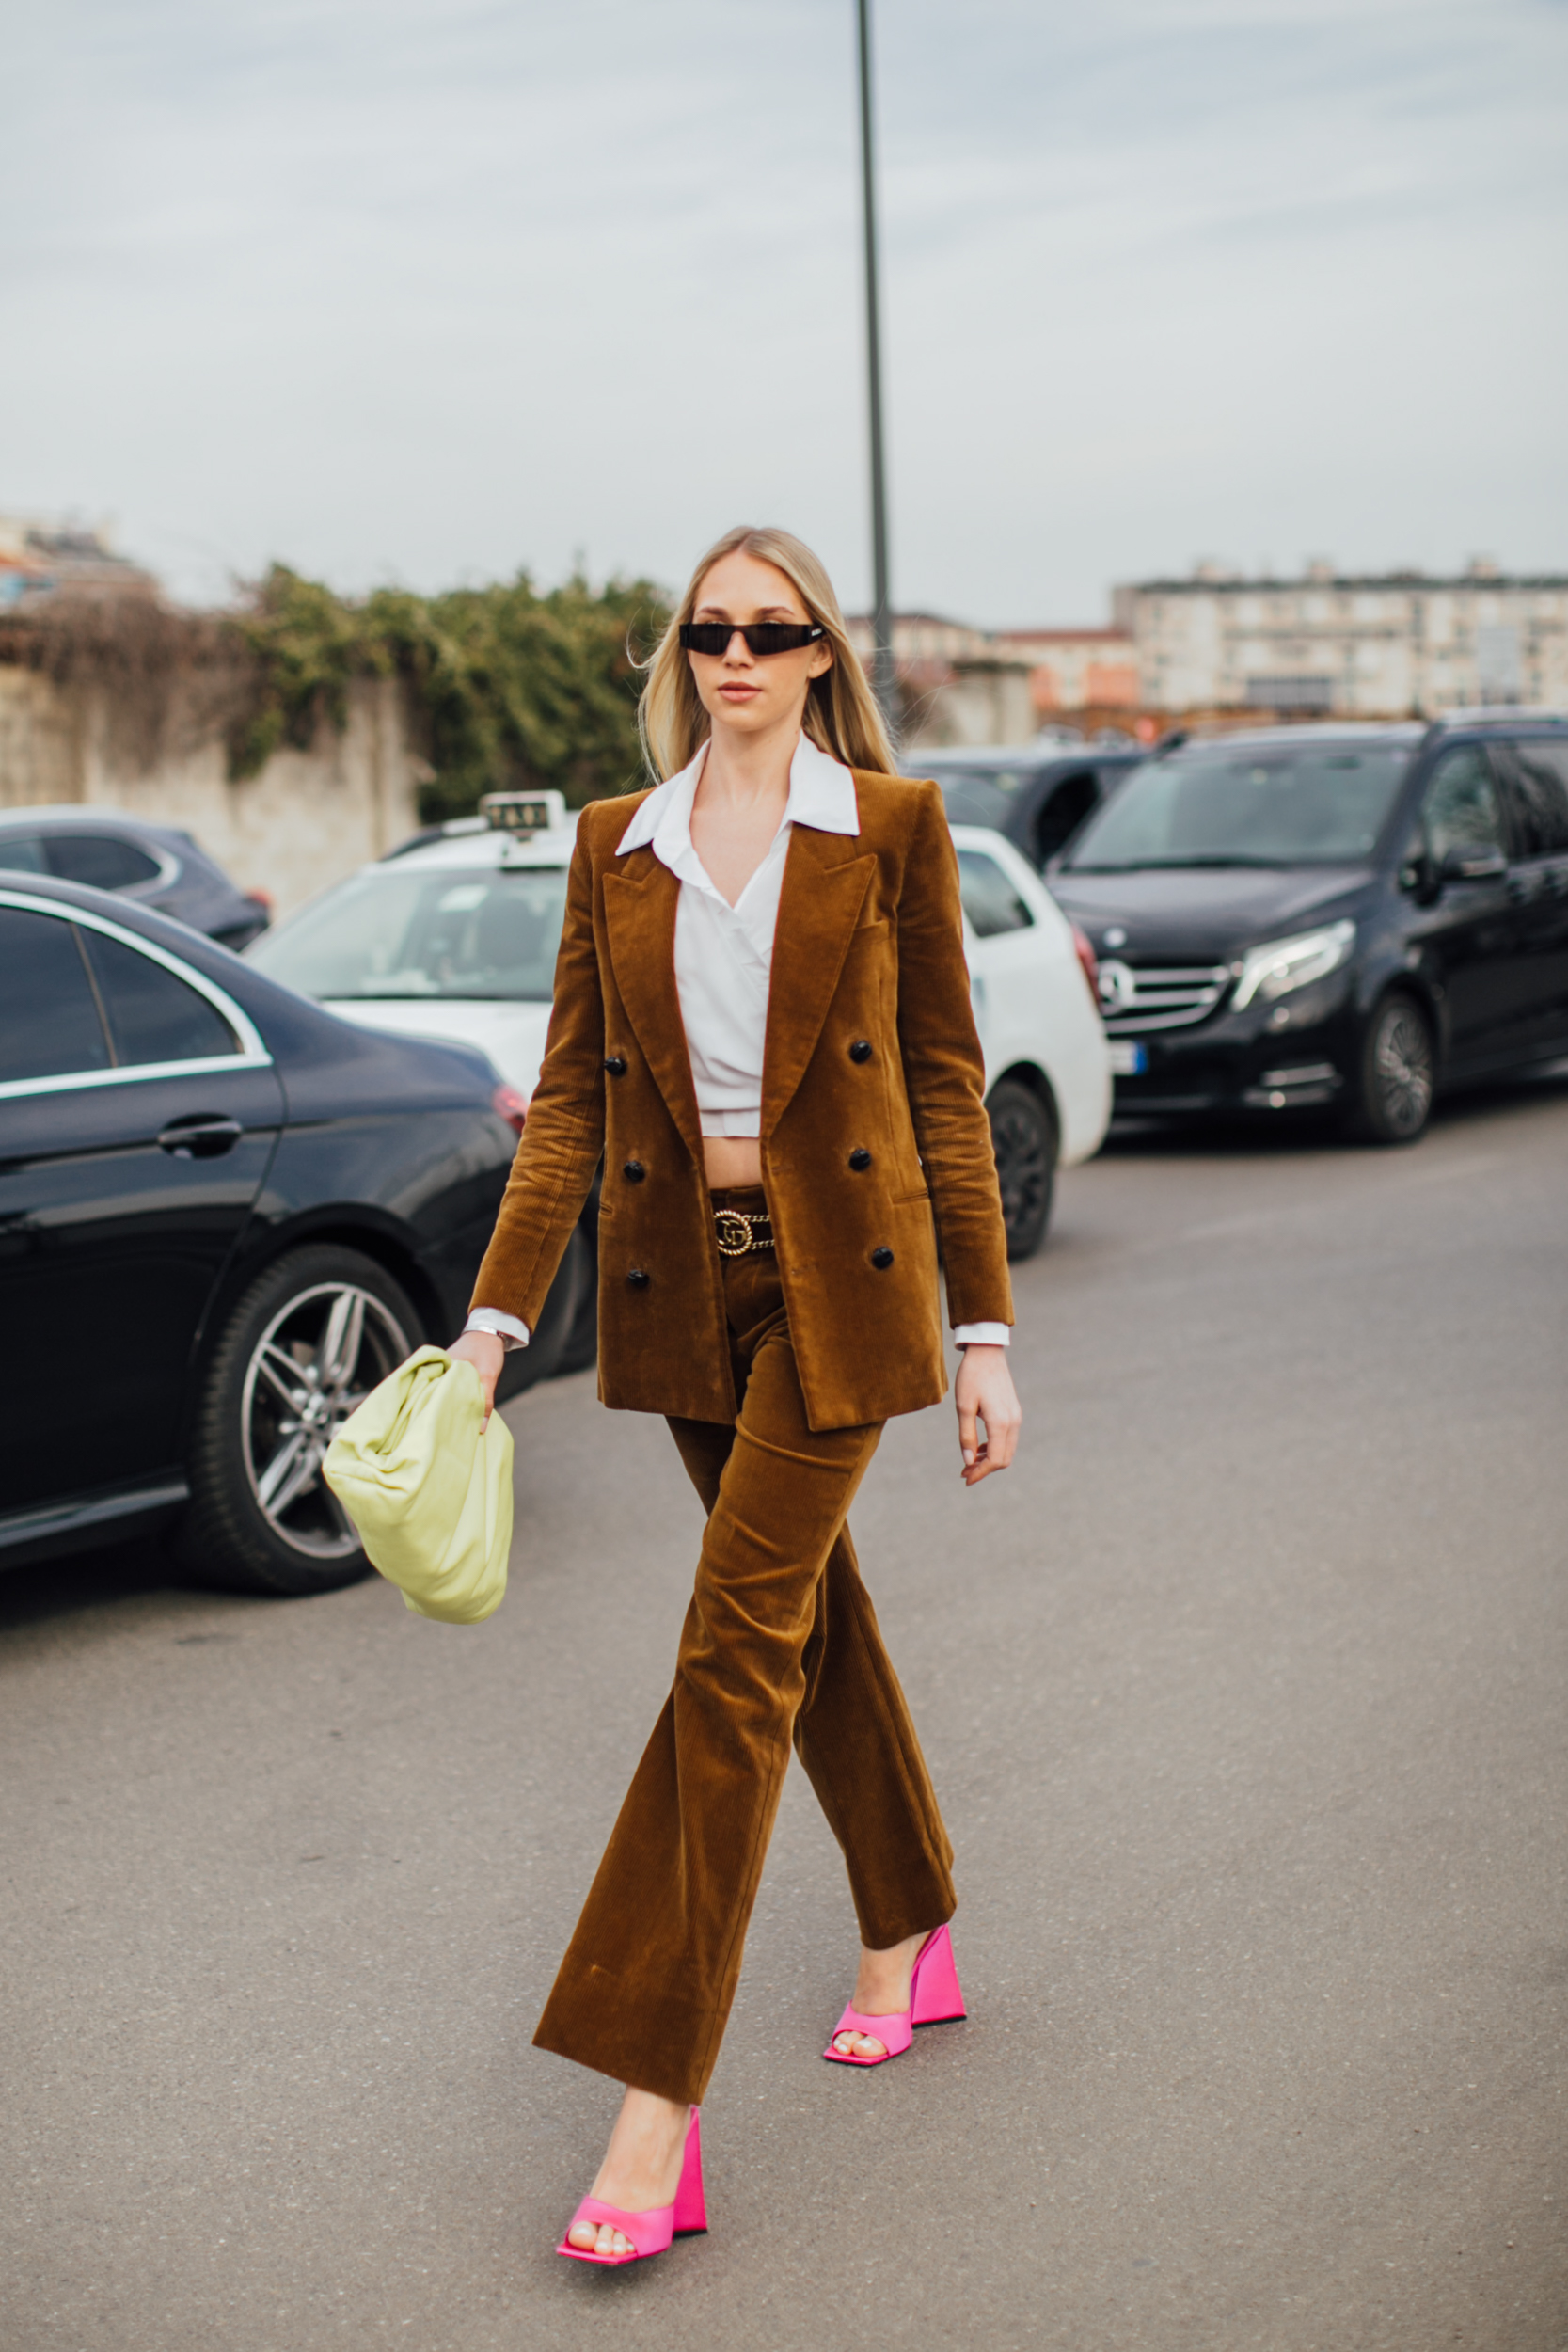 The Street: That 70's Style Fall 2022 Fashion Trend | The Impression